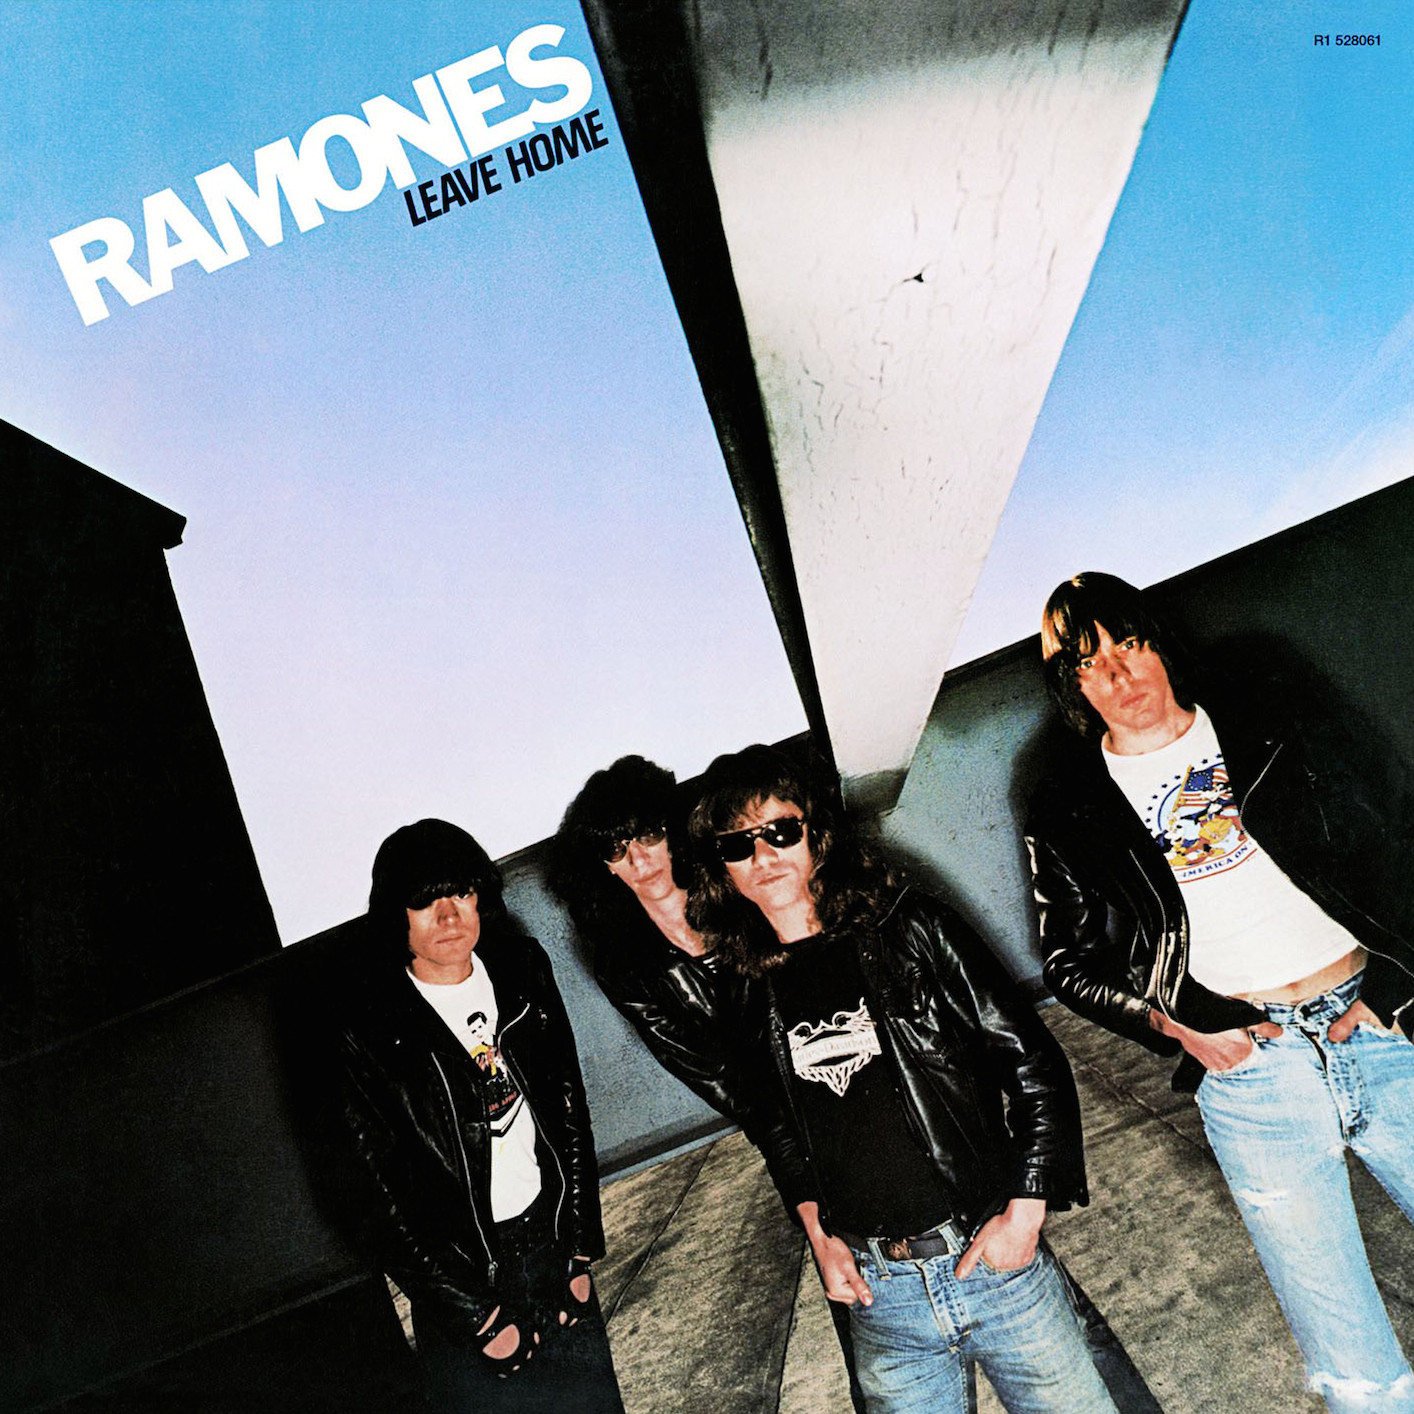 Ramones – Leave Home (40th Anniversary Deluxe Edition) (1977/2017) [FLAC 24bit/96kHz]